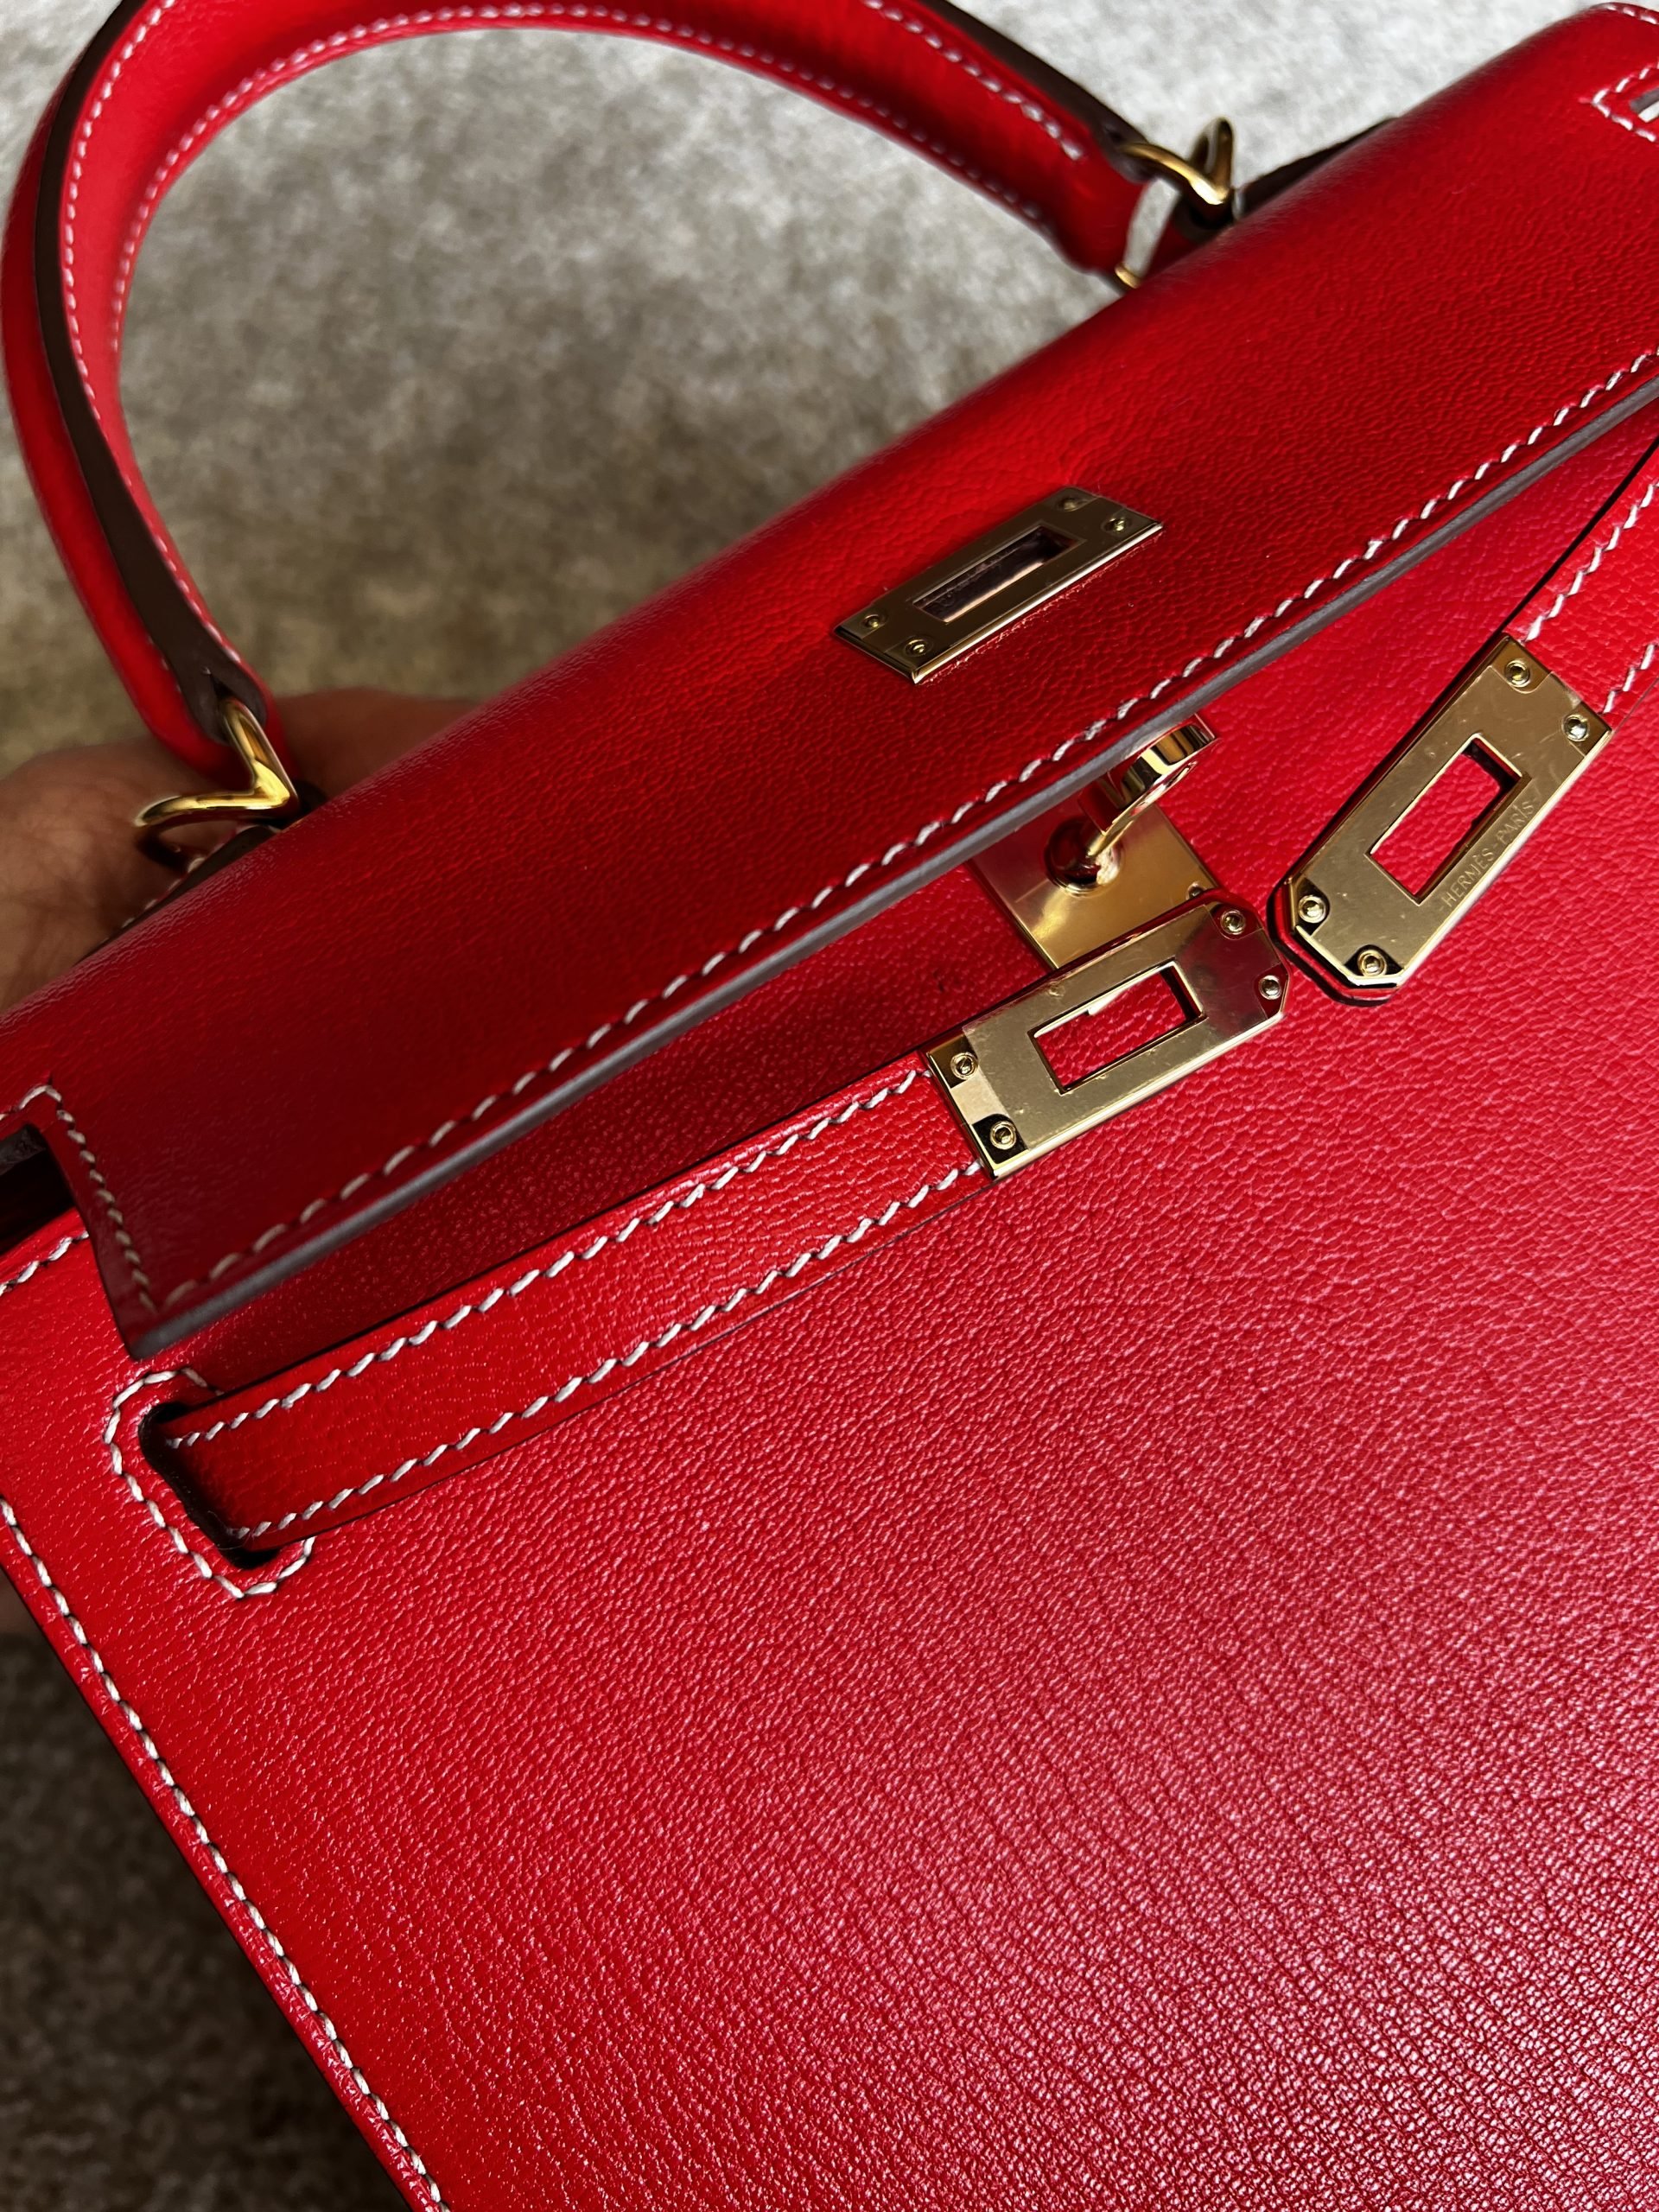 5 Myths About the Hermès Special Order Process - PurseBop